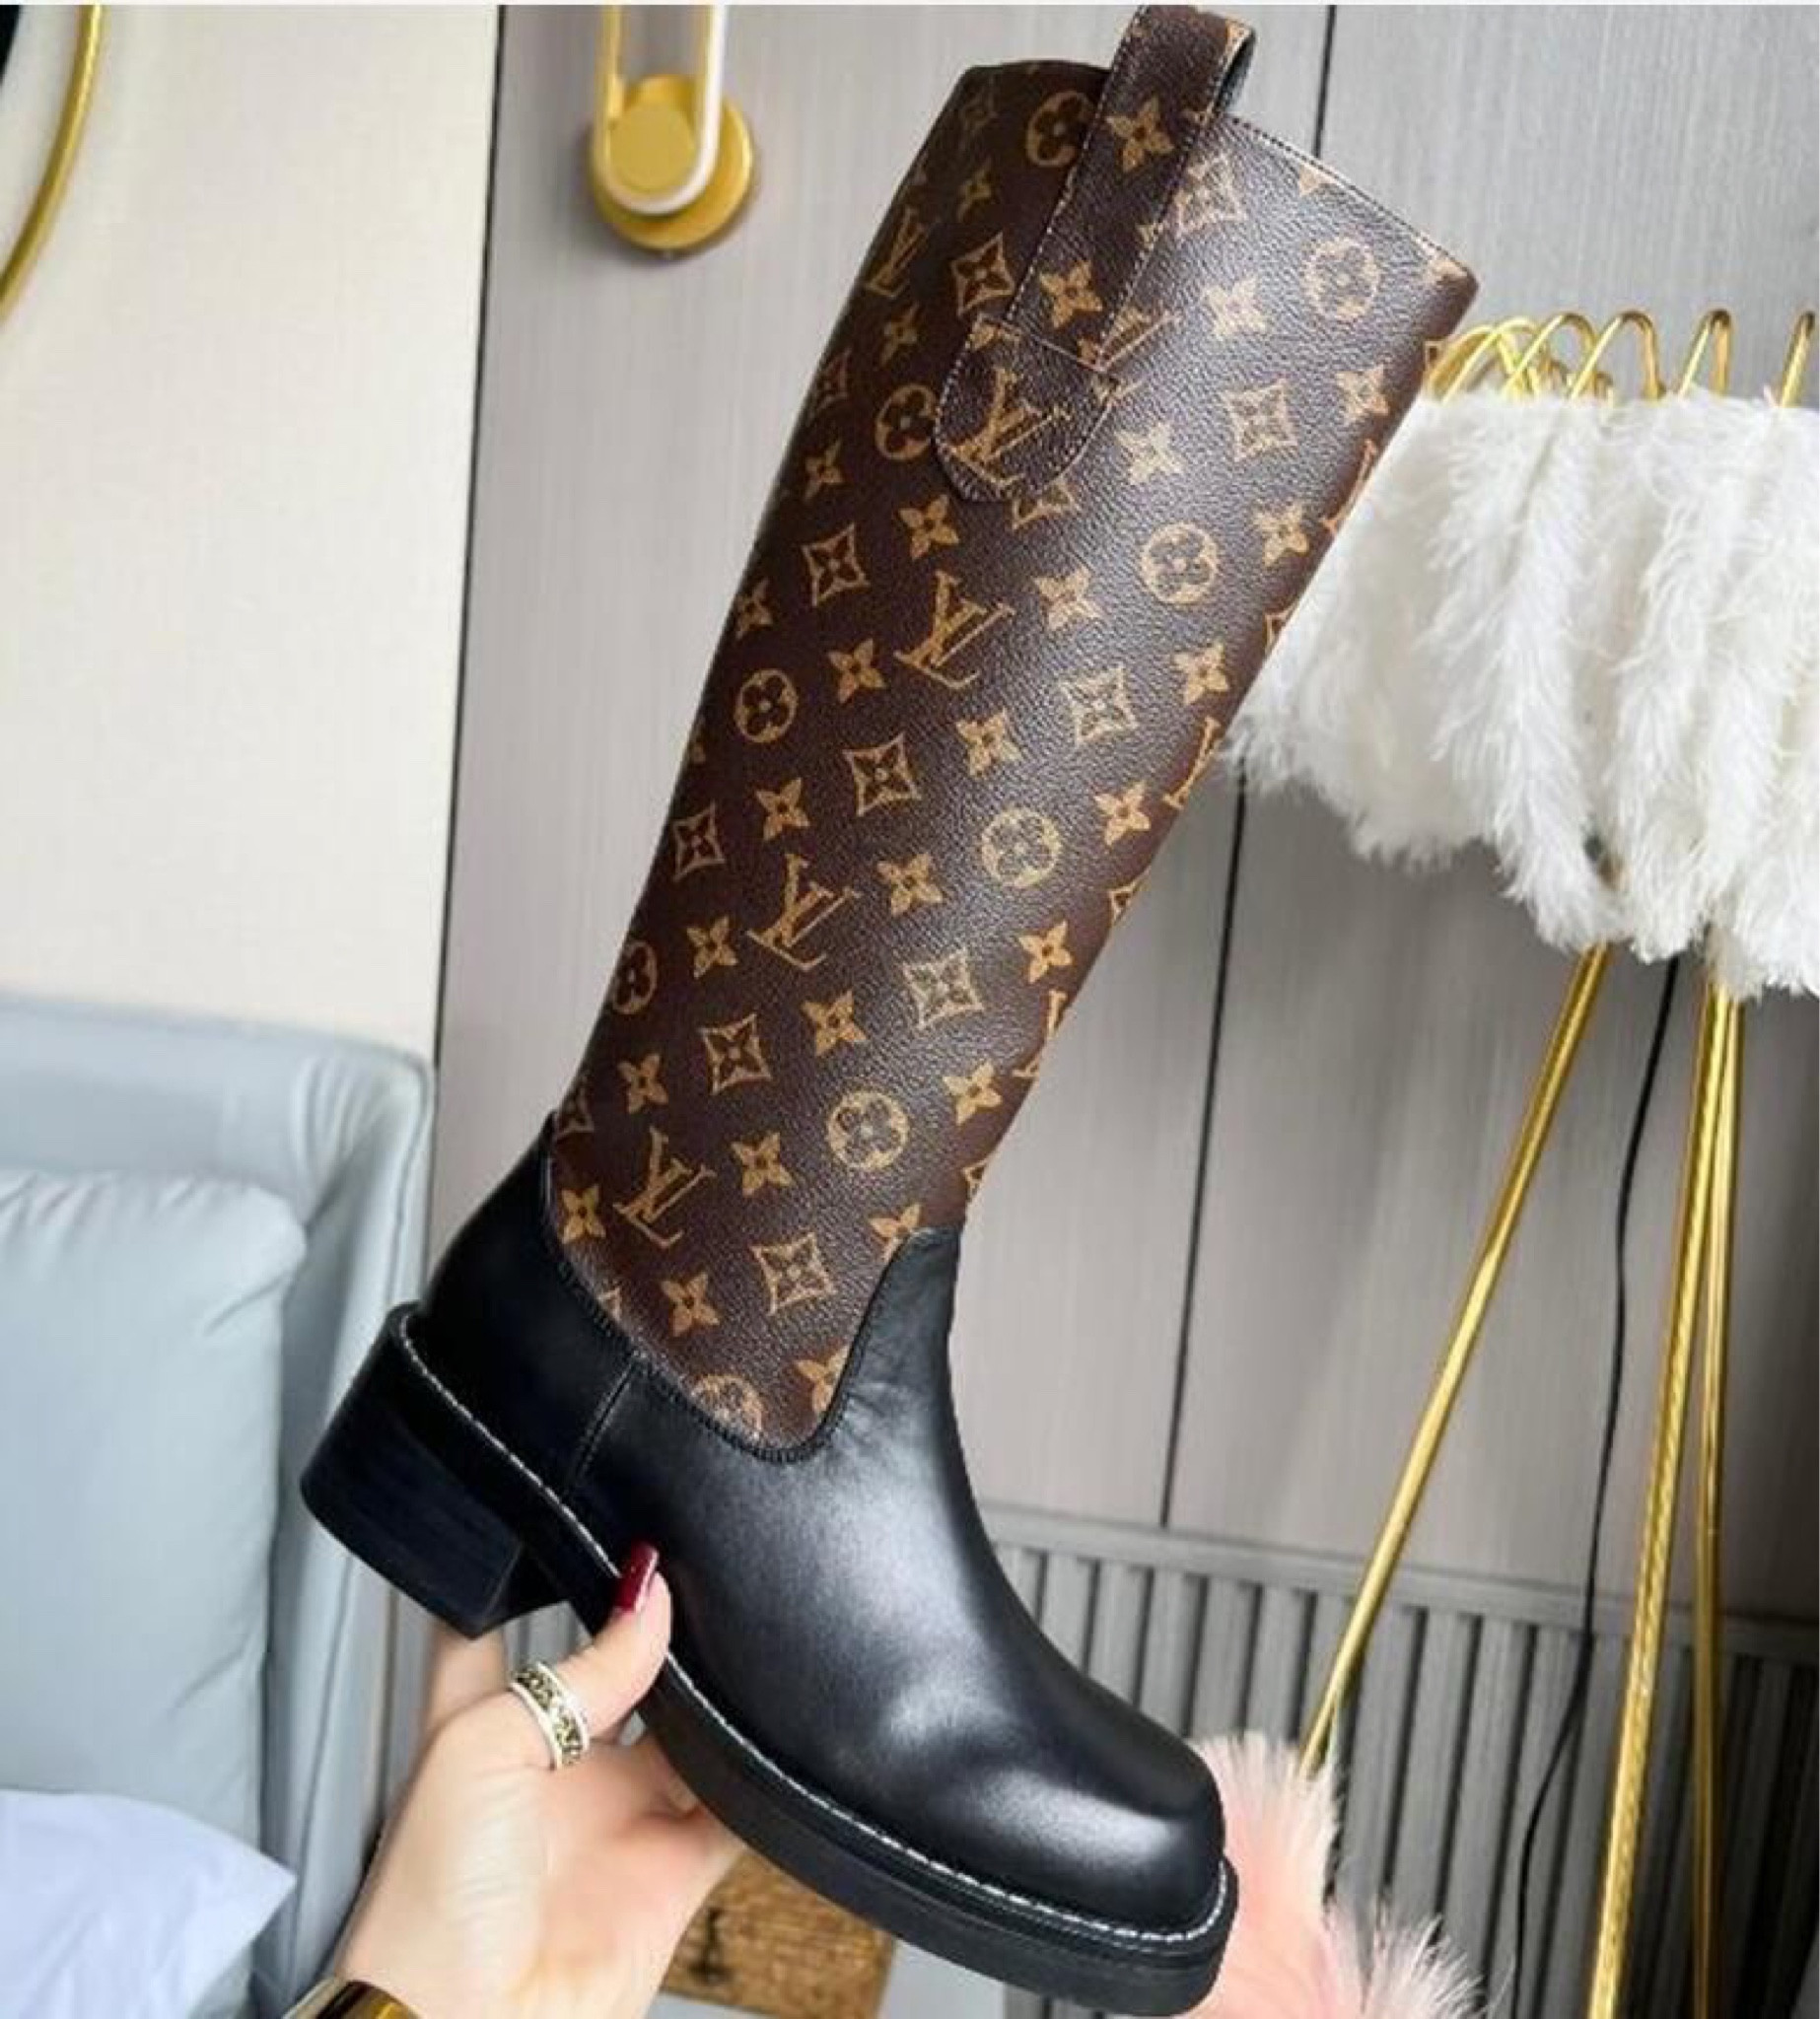 Fashion Bomb Daily - One of the hottest boot designs of the season by @ louisvuitton . These Patti Wedge high boots featuring zip and popper  details and LV monogram accents. Priced at